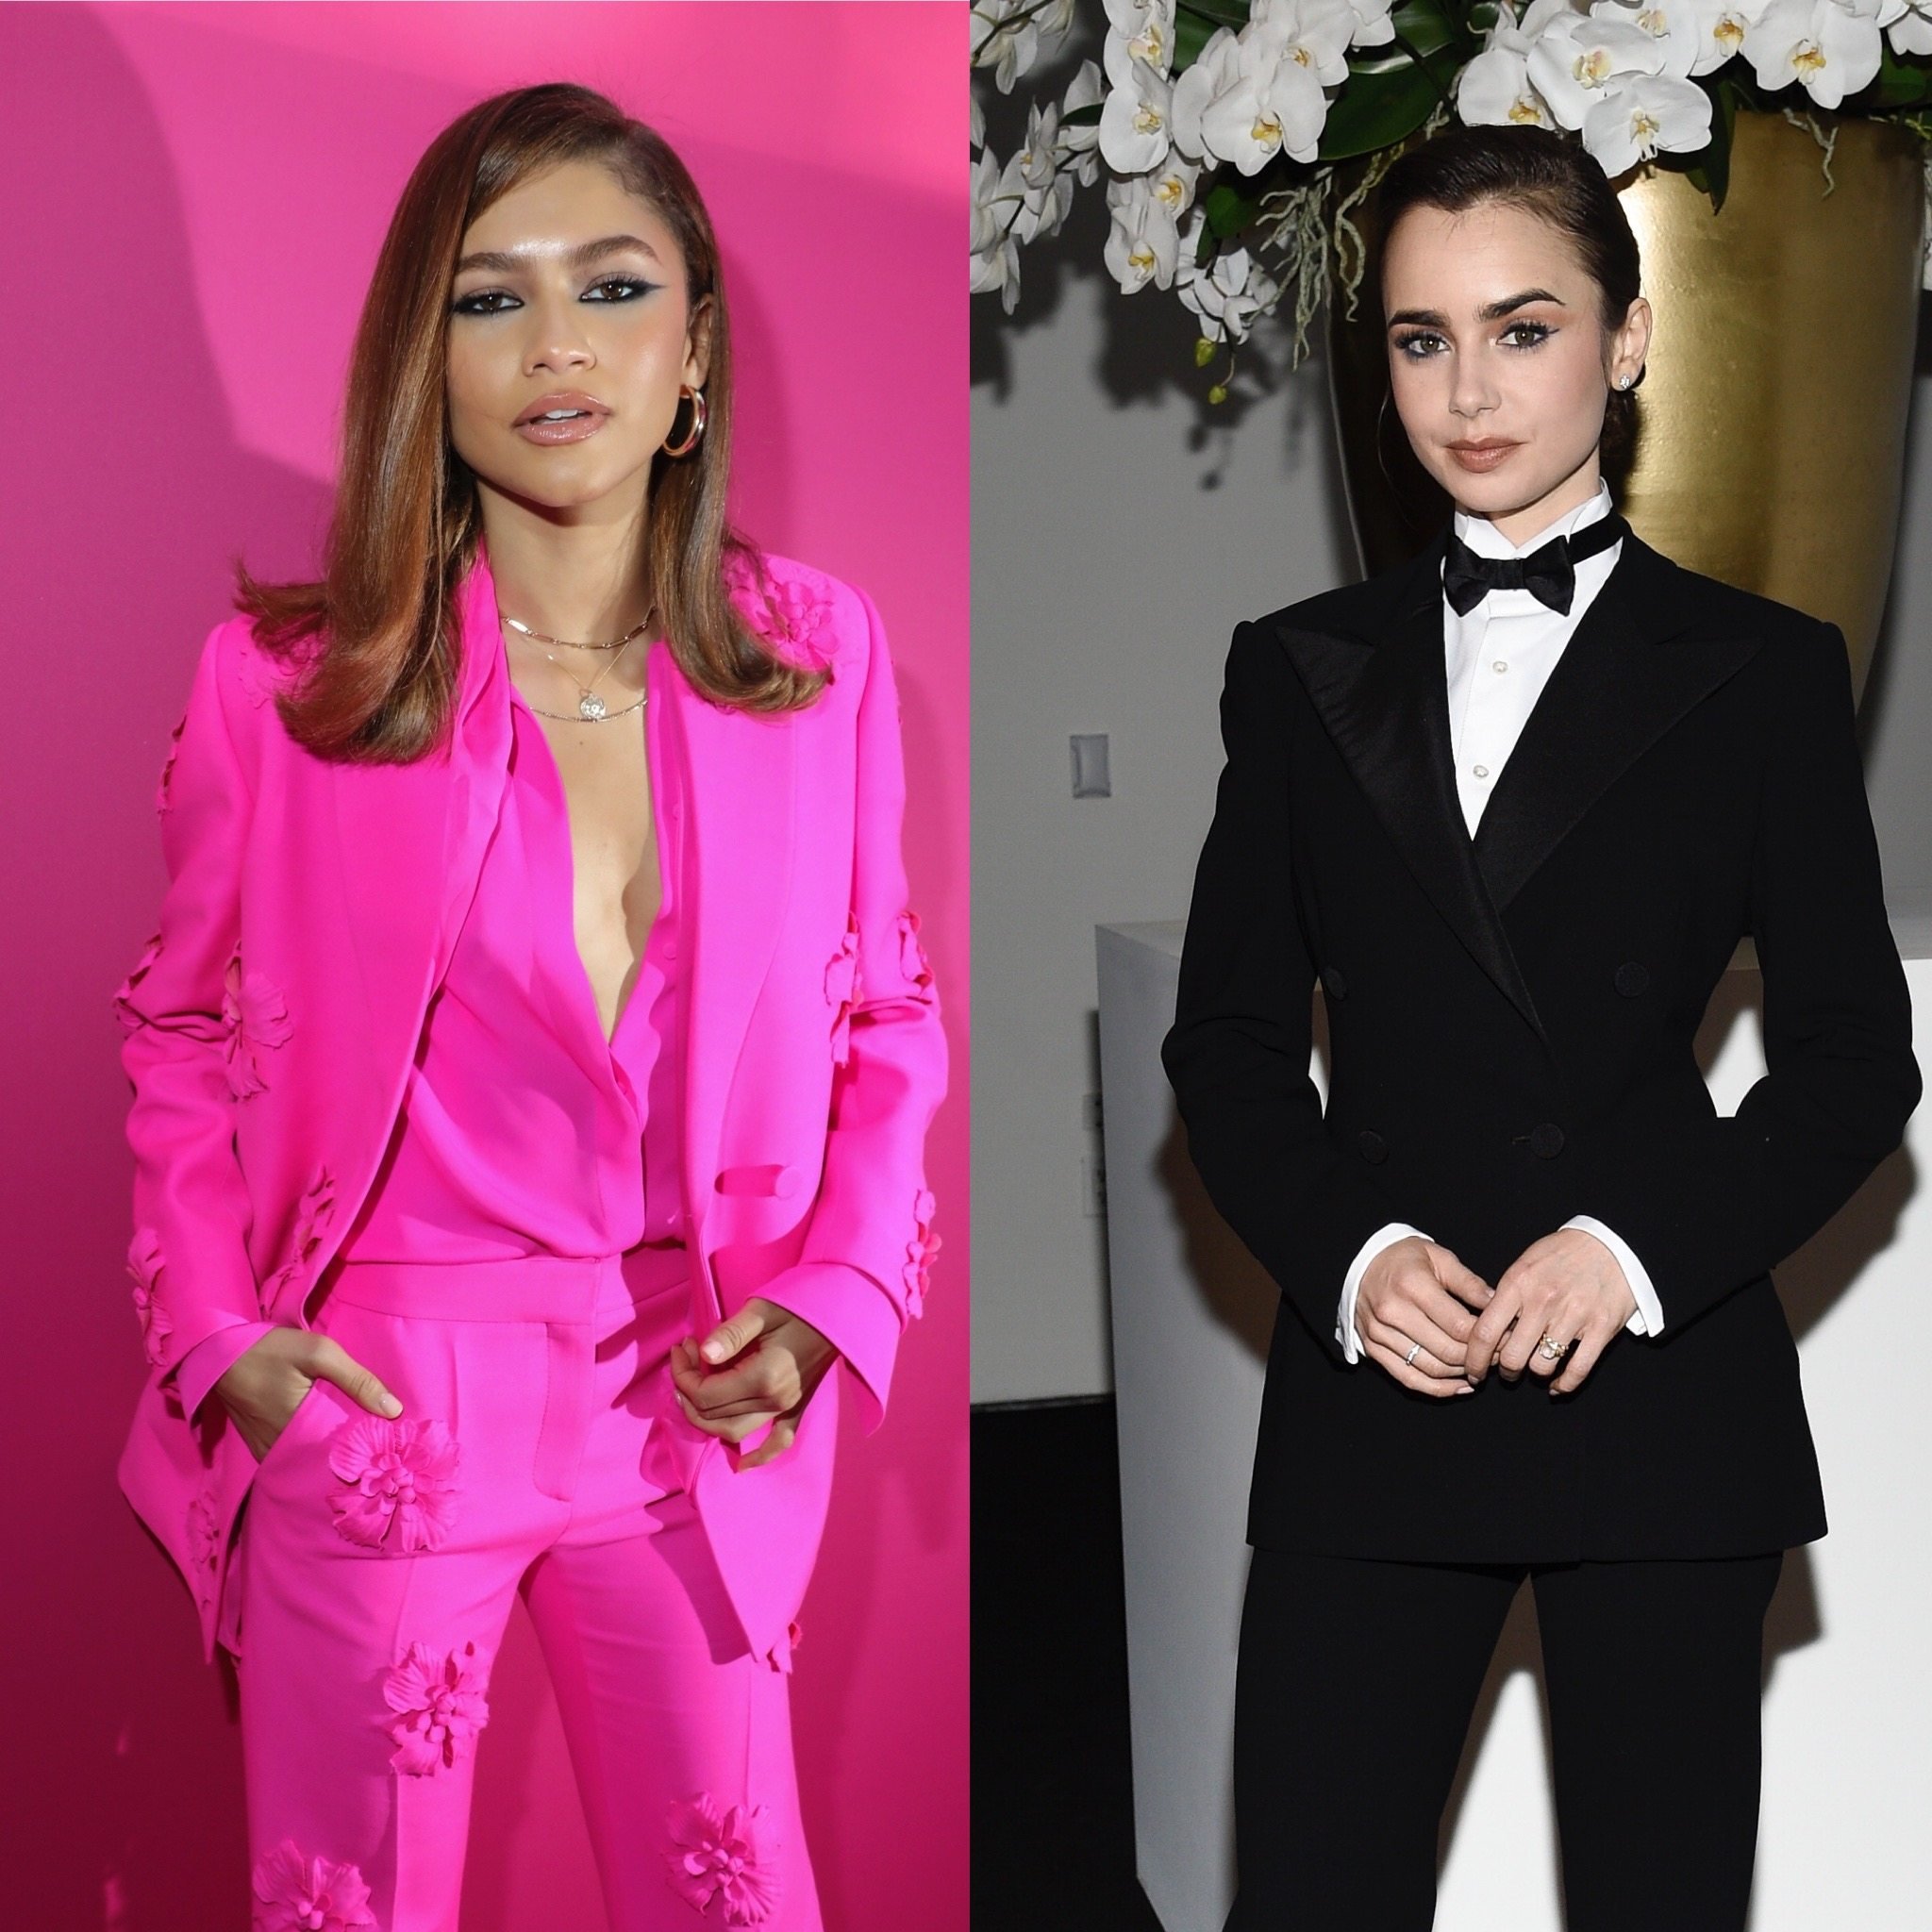 Zendaya’s recent bright pink Valentino look and Lily Collins’ all-black tux show women’s fashion has turned its eye towards the tailored suit again. Photos: AP